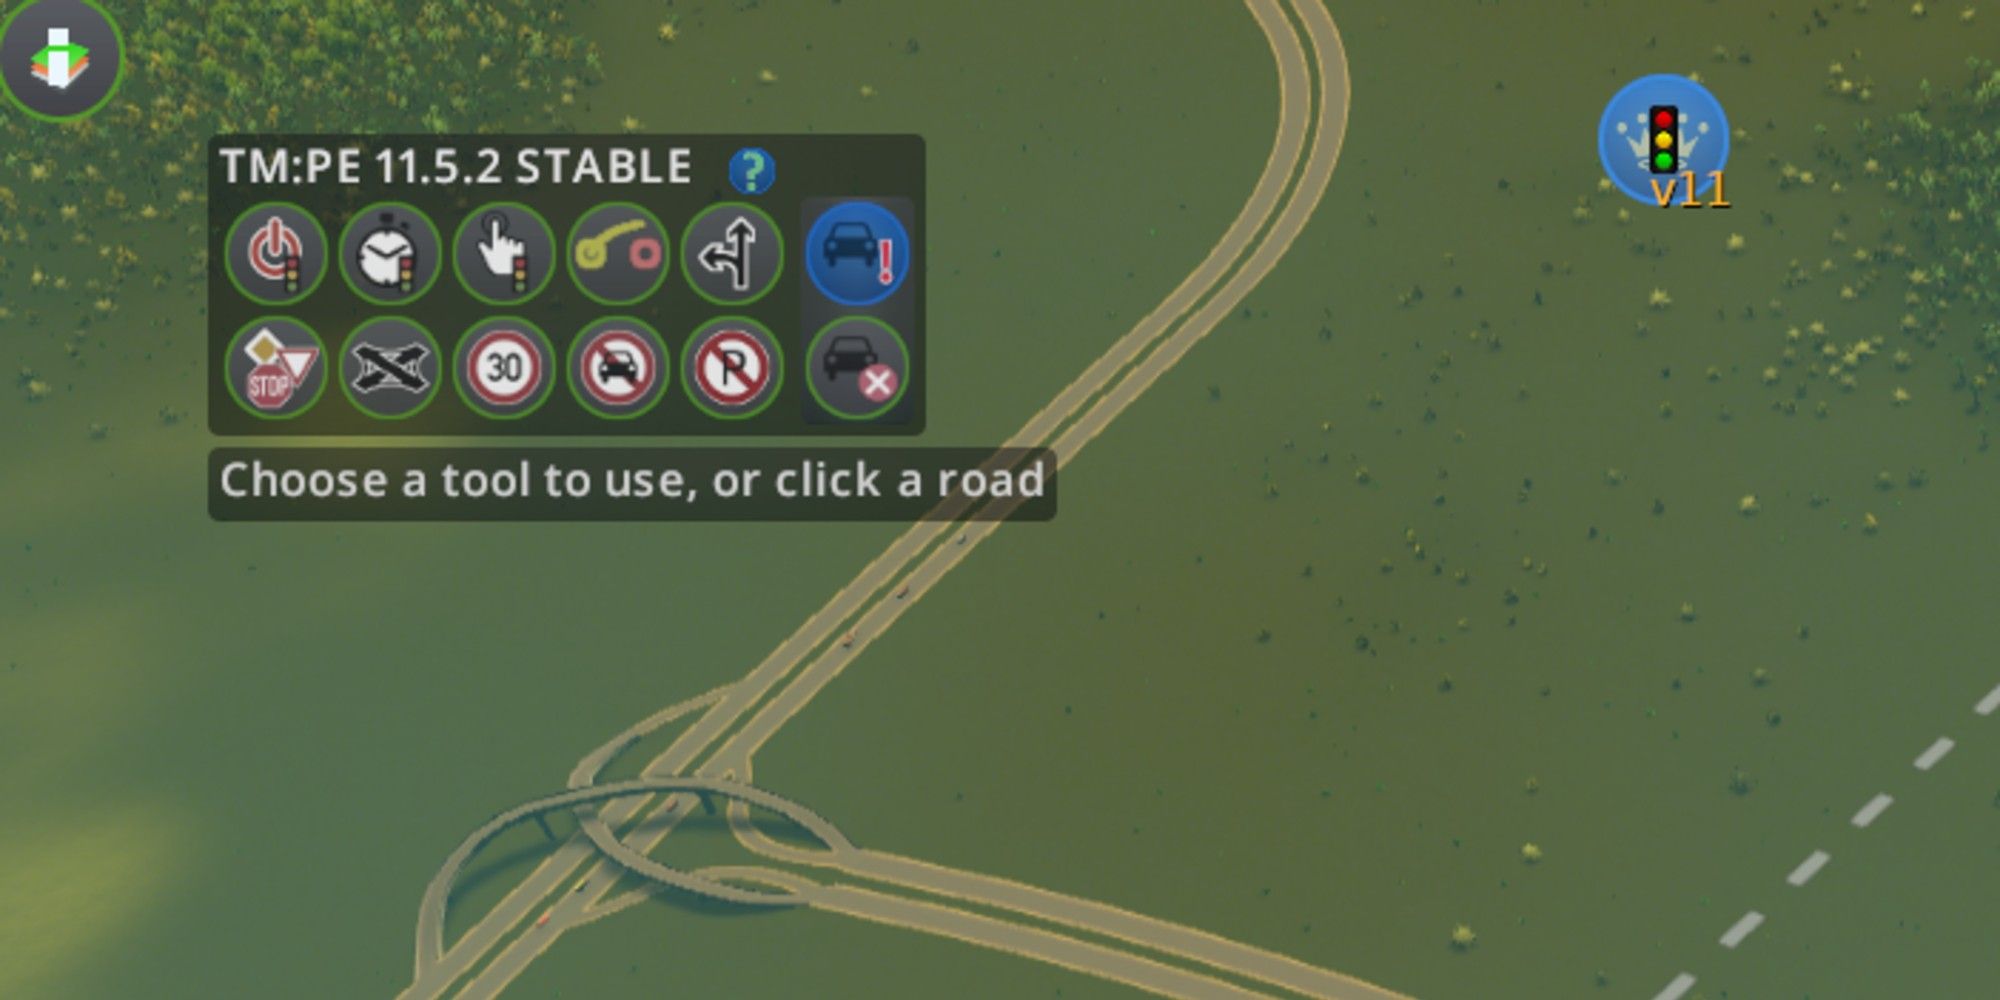 mod menu displayed with traffic related buttons